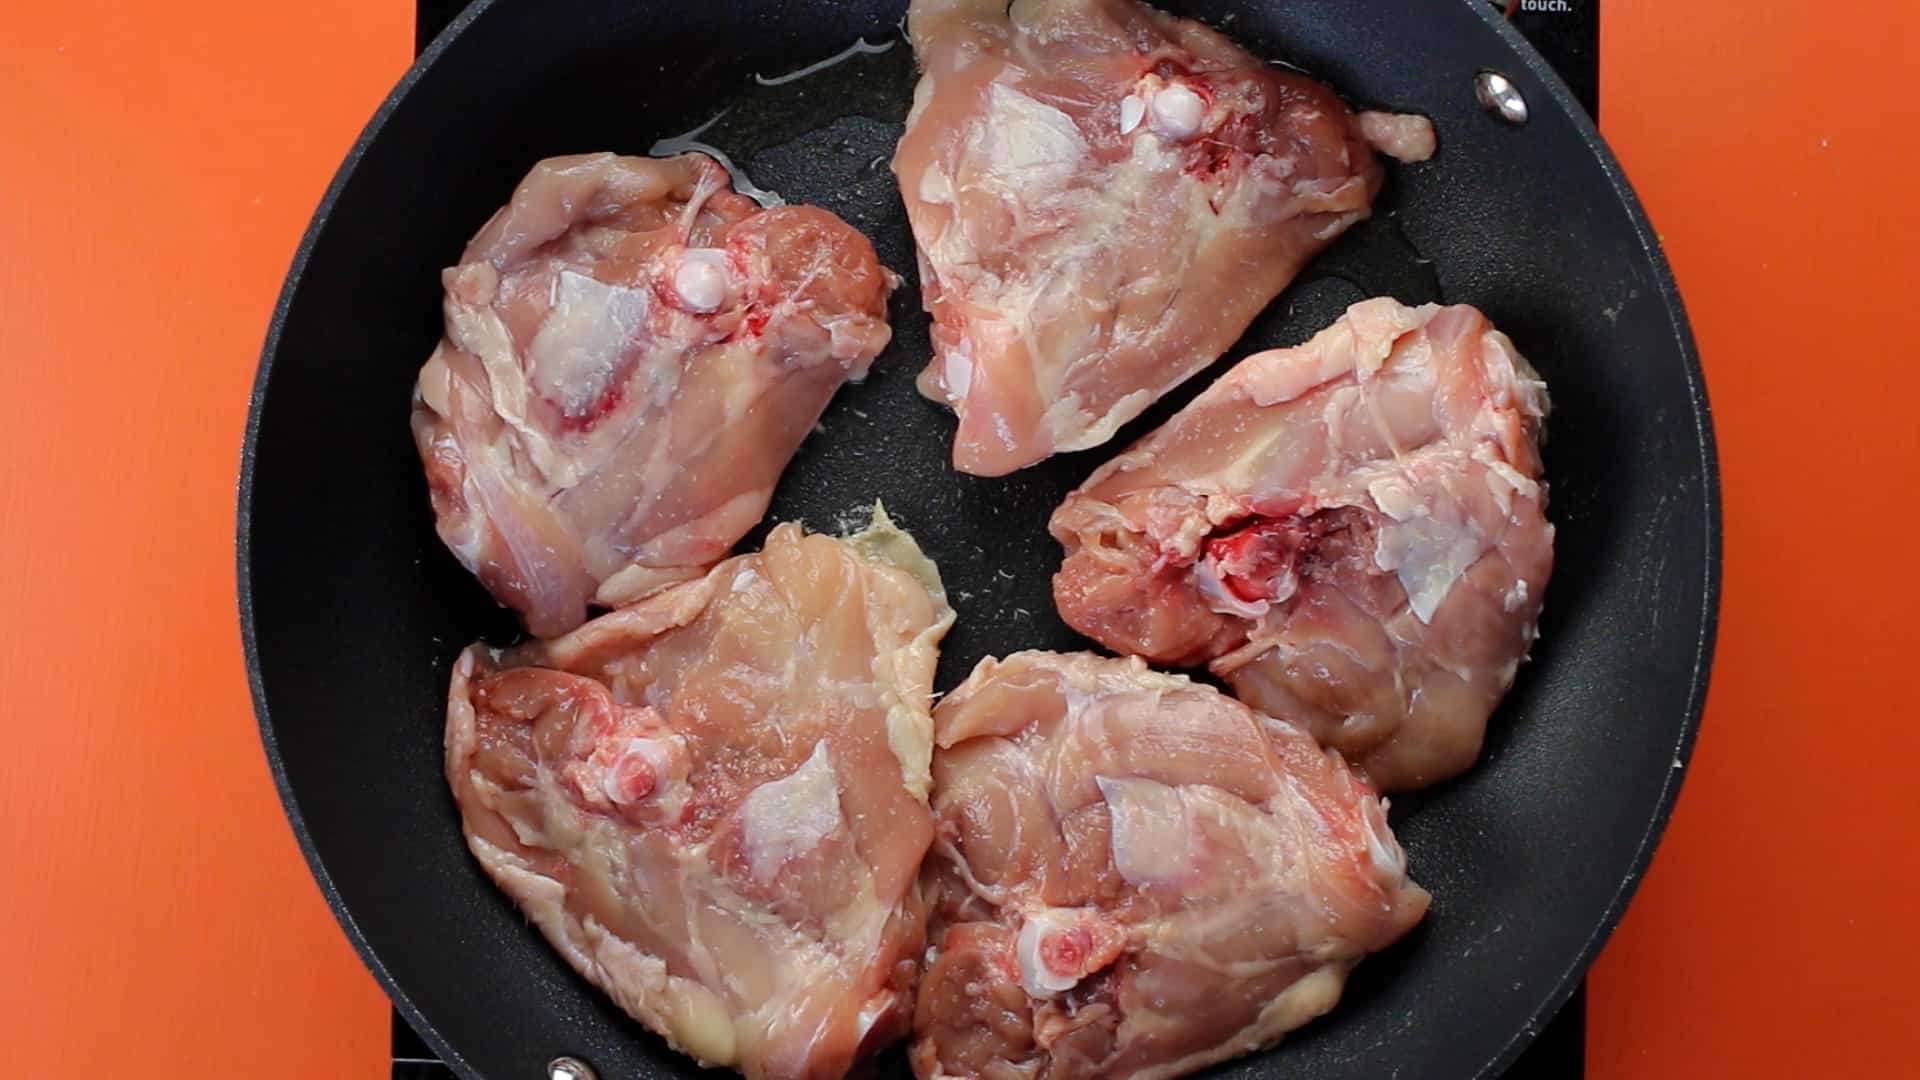 Chicken thighs skin side dow in frying pan on stove